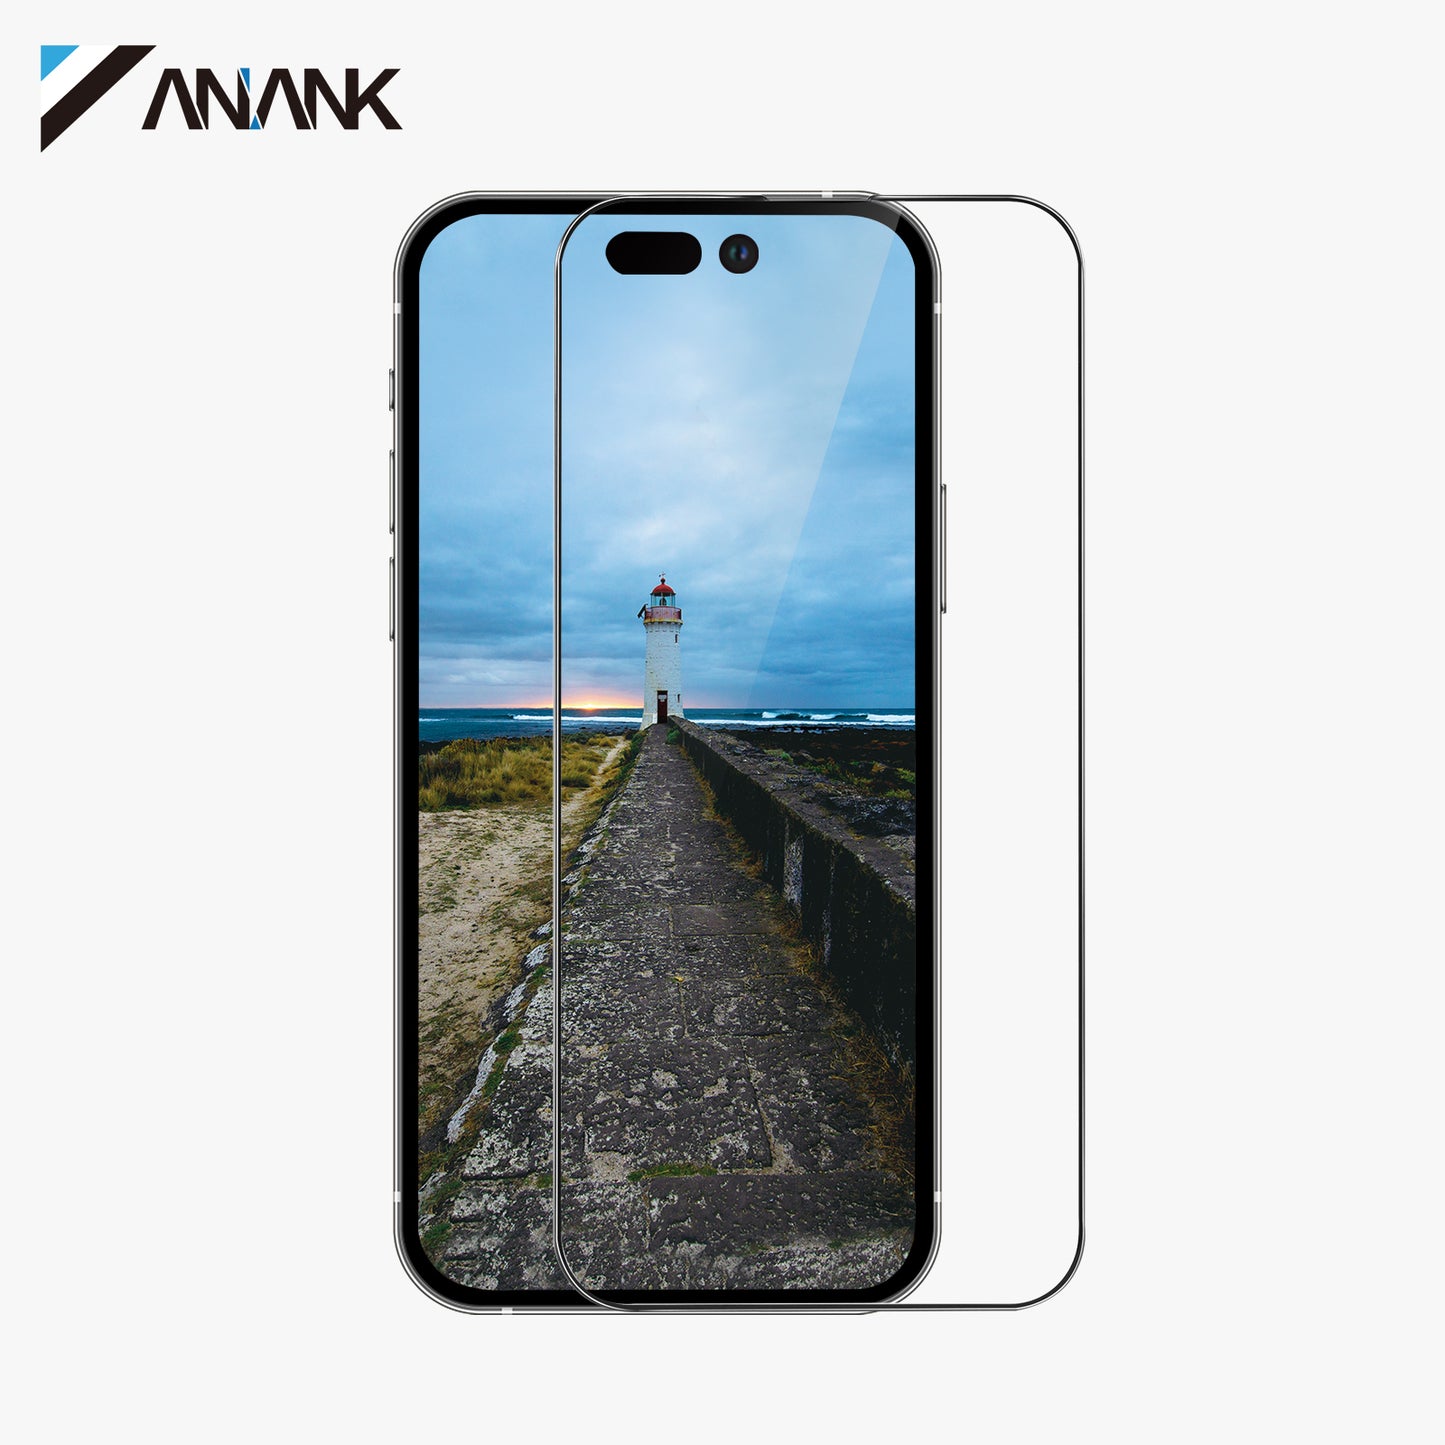 ANANK 2.5D Full Glass with Reinforced Treatment Tempered Glass for iPhone 15 Series (2023)